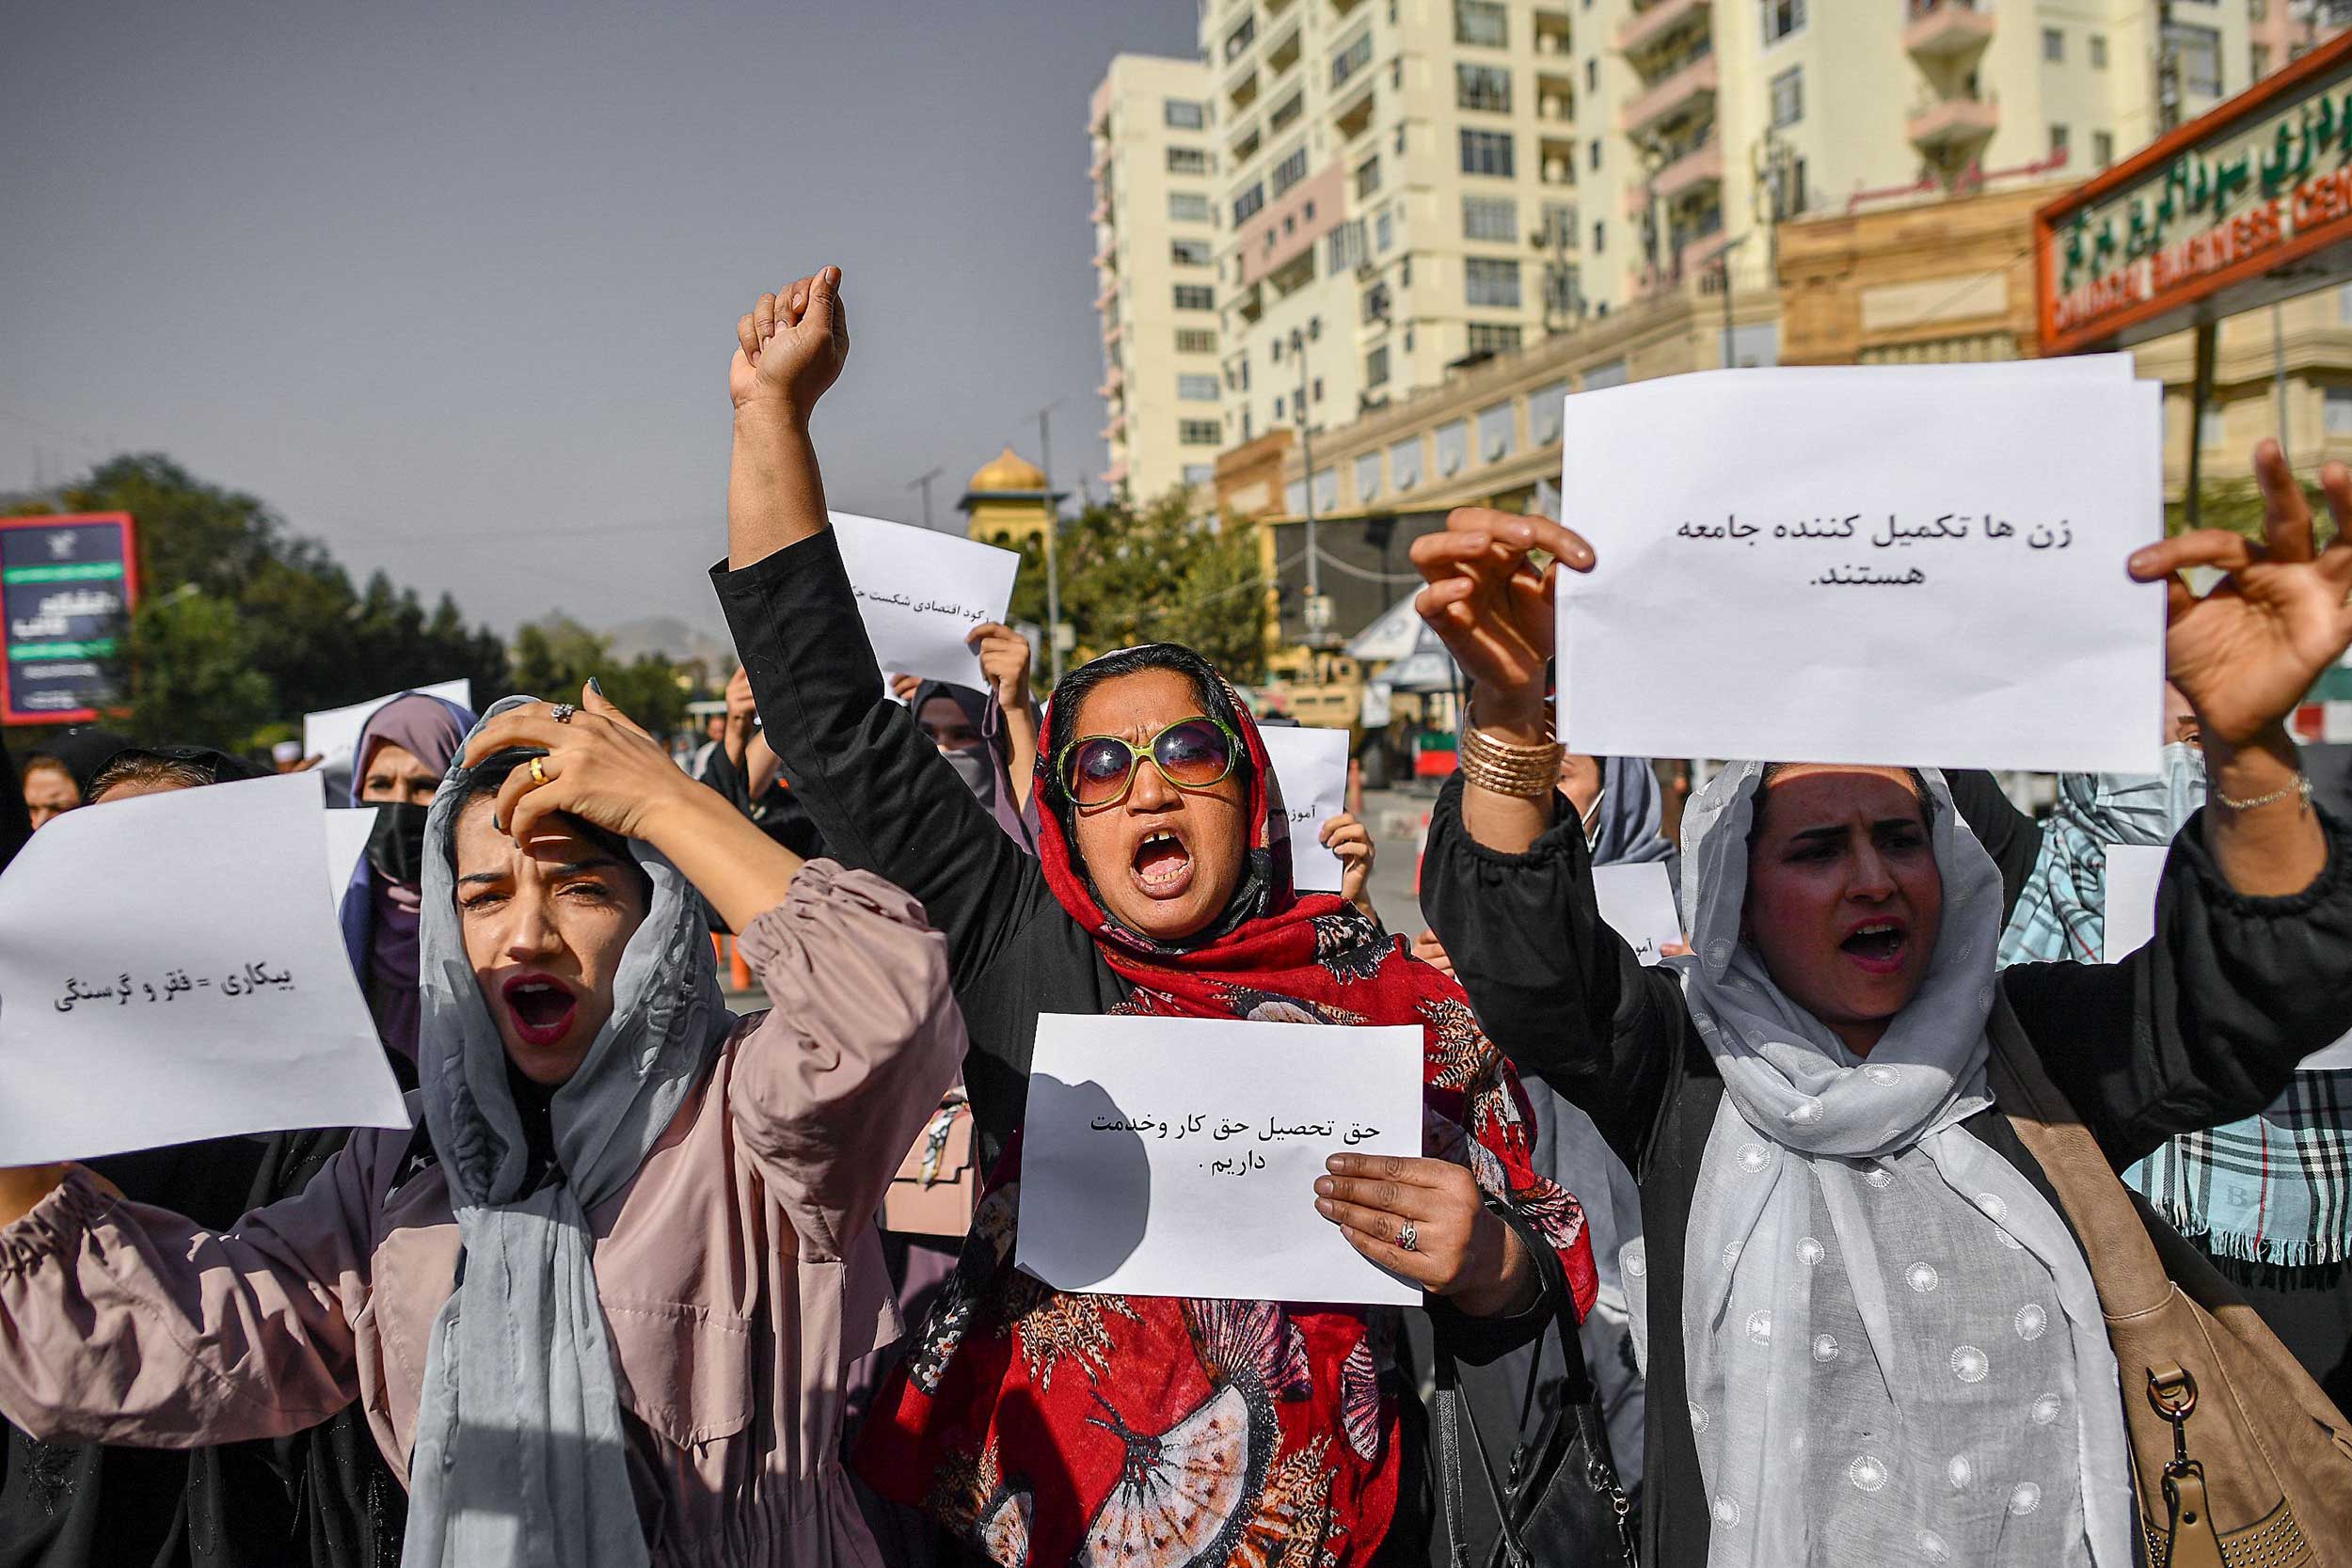 Afghan women chant slogans and hold placard during a women's rights protest in Kabul on October 21, 2021. The Taleban violently cracked down on media coverage of the protest in Kabul, beating several journalists. © BULENT KILIC/AFP via Getty Images